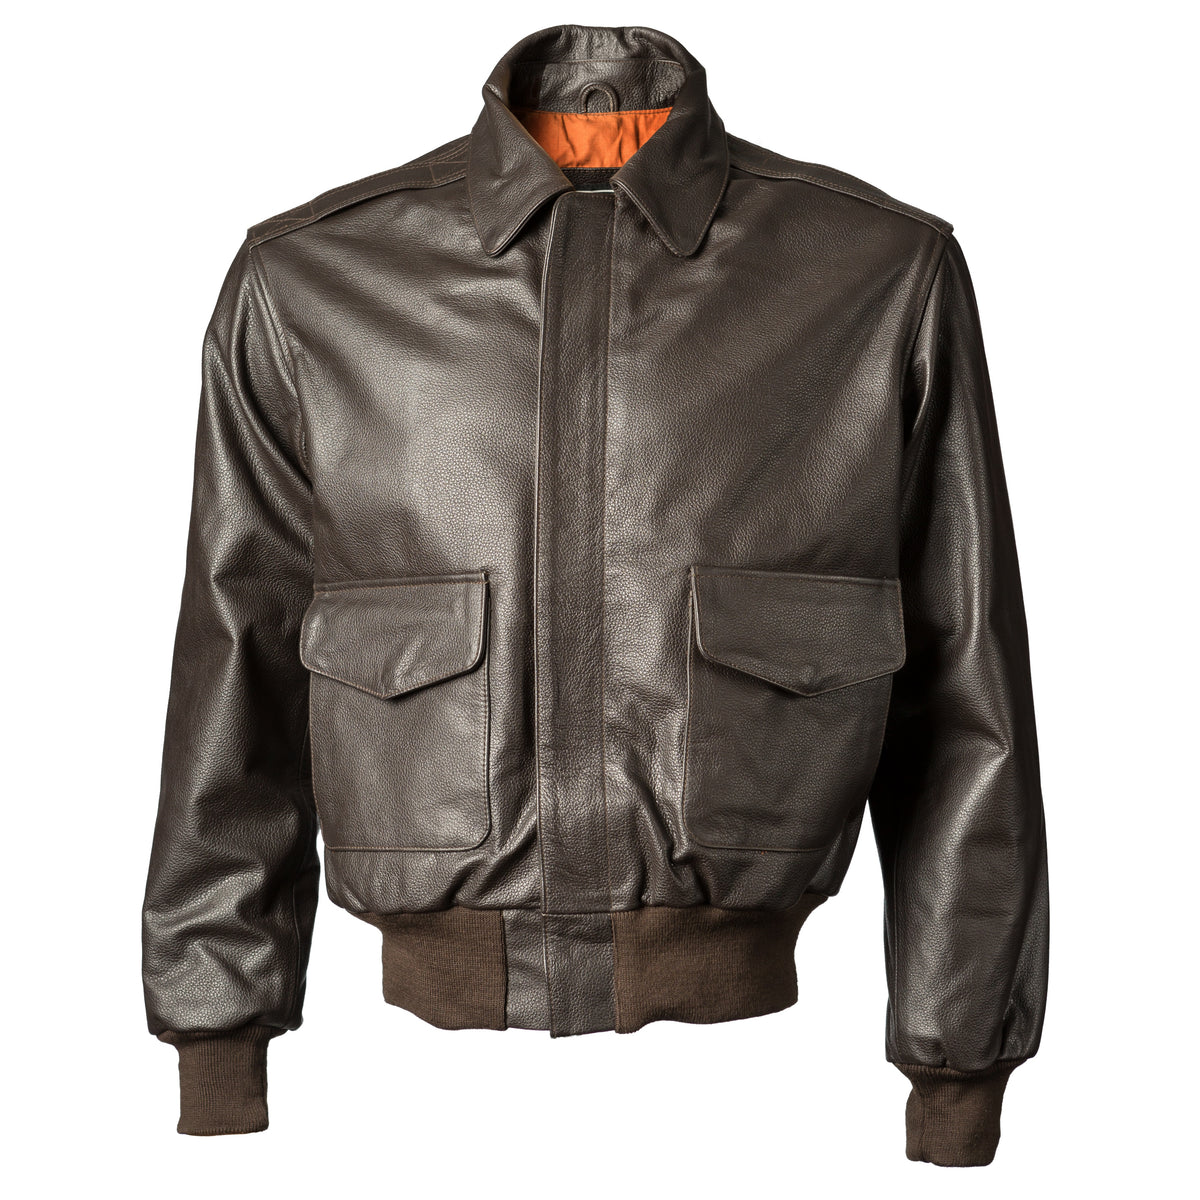 John Ownbey Men's Leather A-2 Style Jacket – Brown – McGuire Army Navy